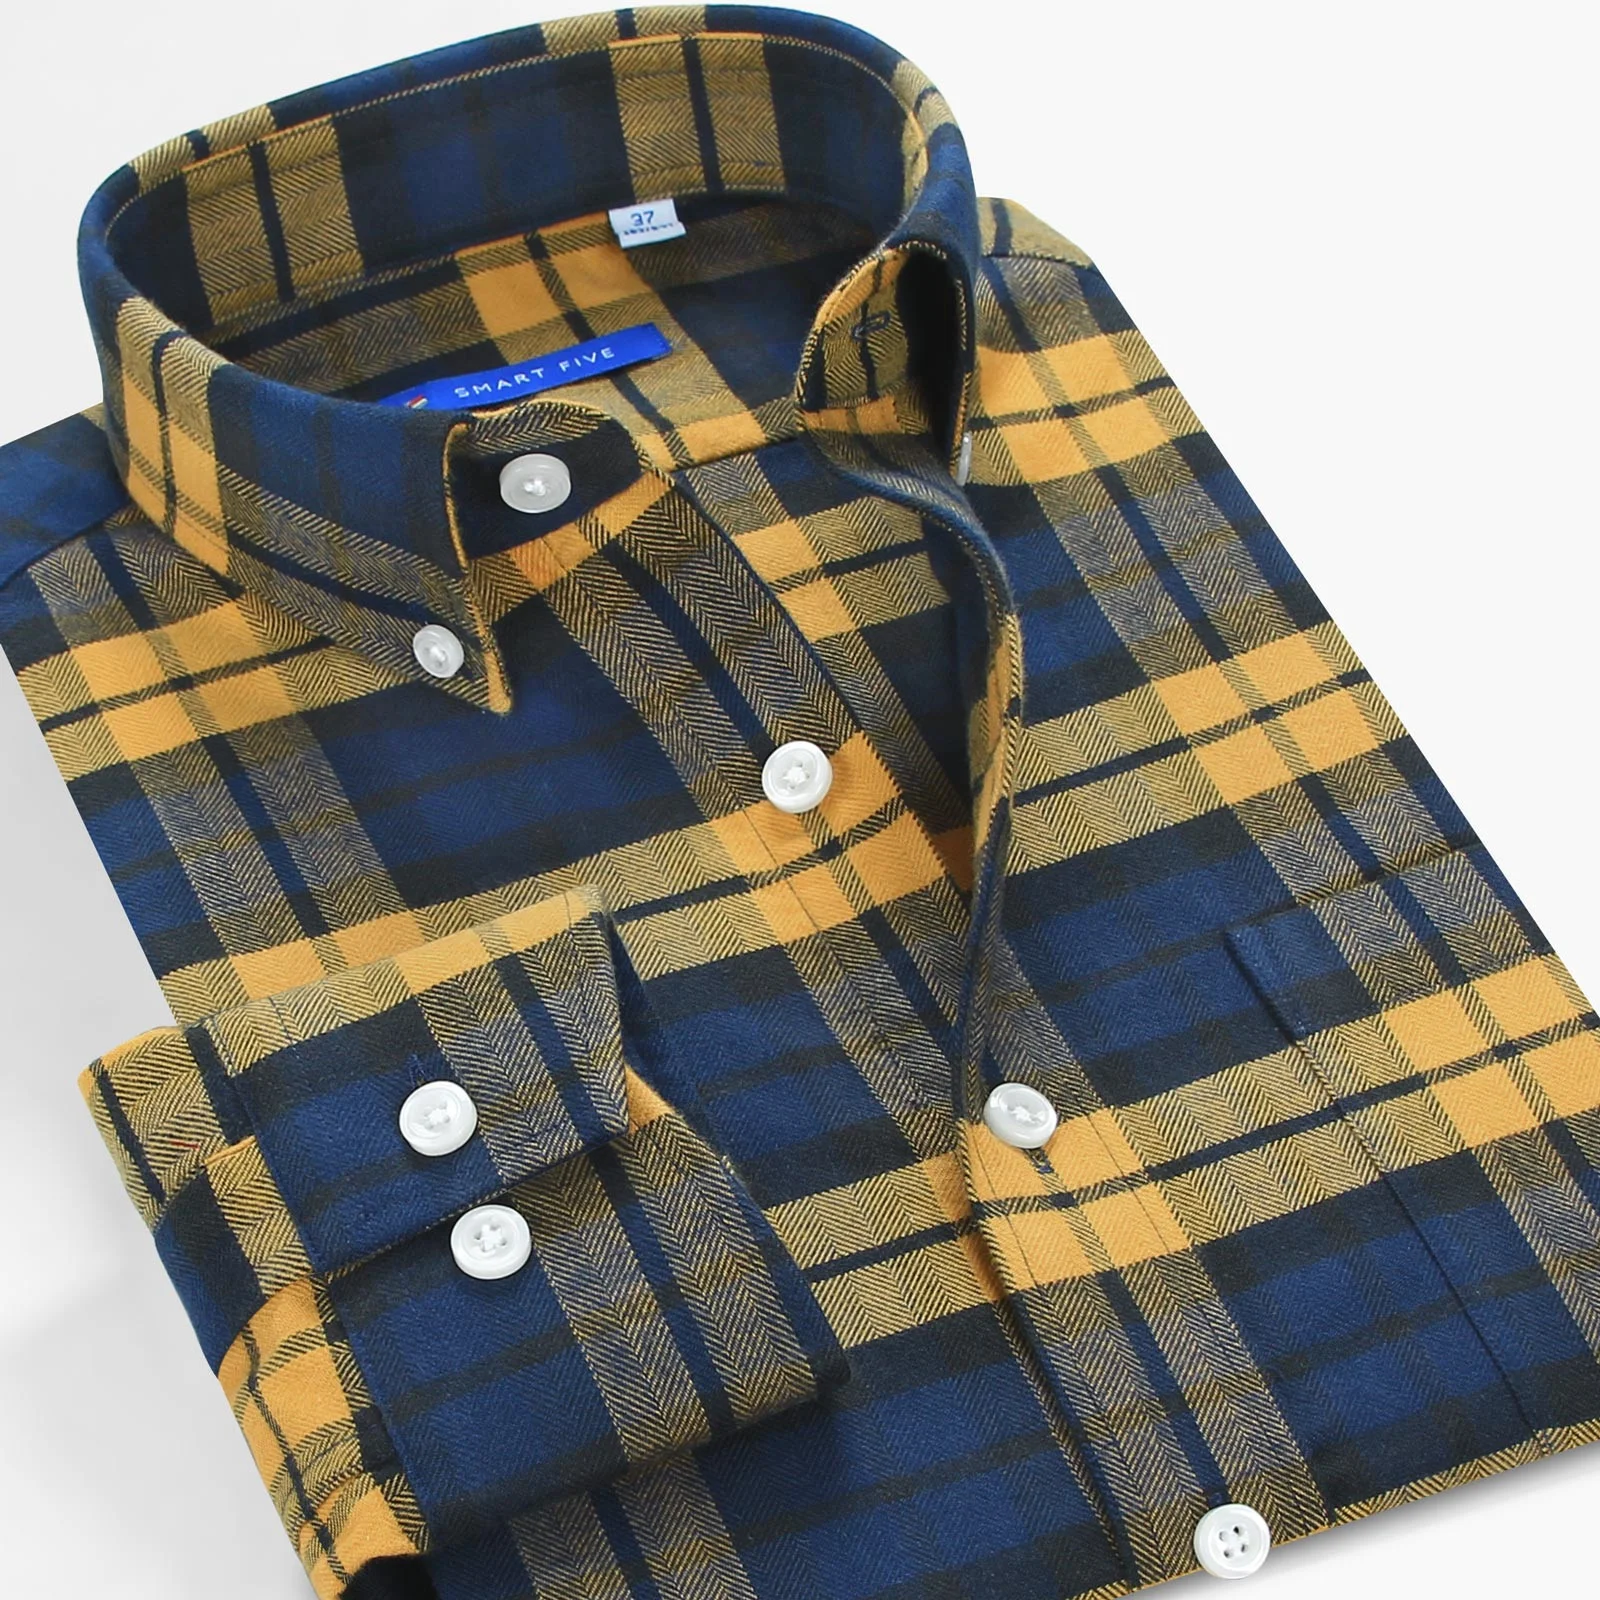 Five Smart Flannel Shirt Men Clothing Thick Long Sleeve Casual Plaid Shirt Slim Fit Branded Vintage 2022 New Man Shirts